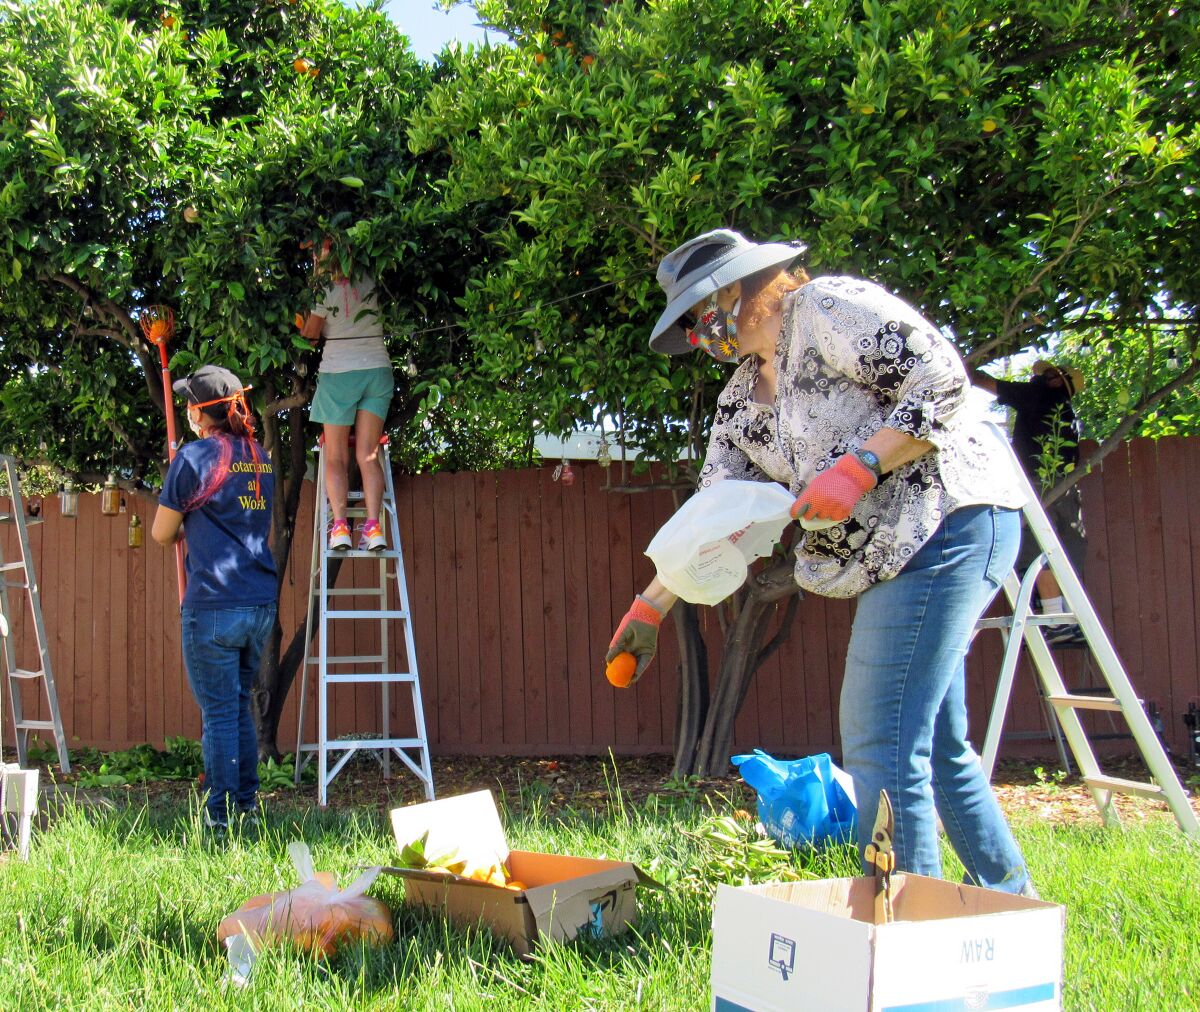 La Mesa Rotary Club members pick oranges recently in the backyard of a home in the San Carlos area.